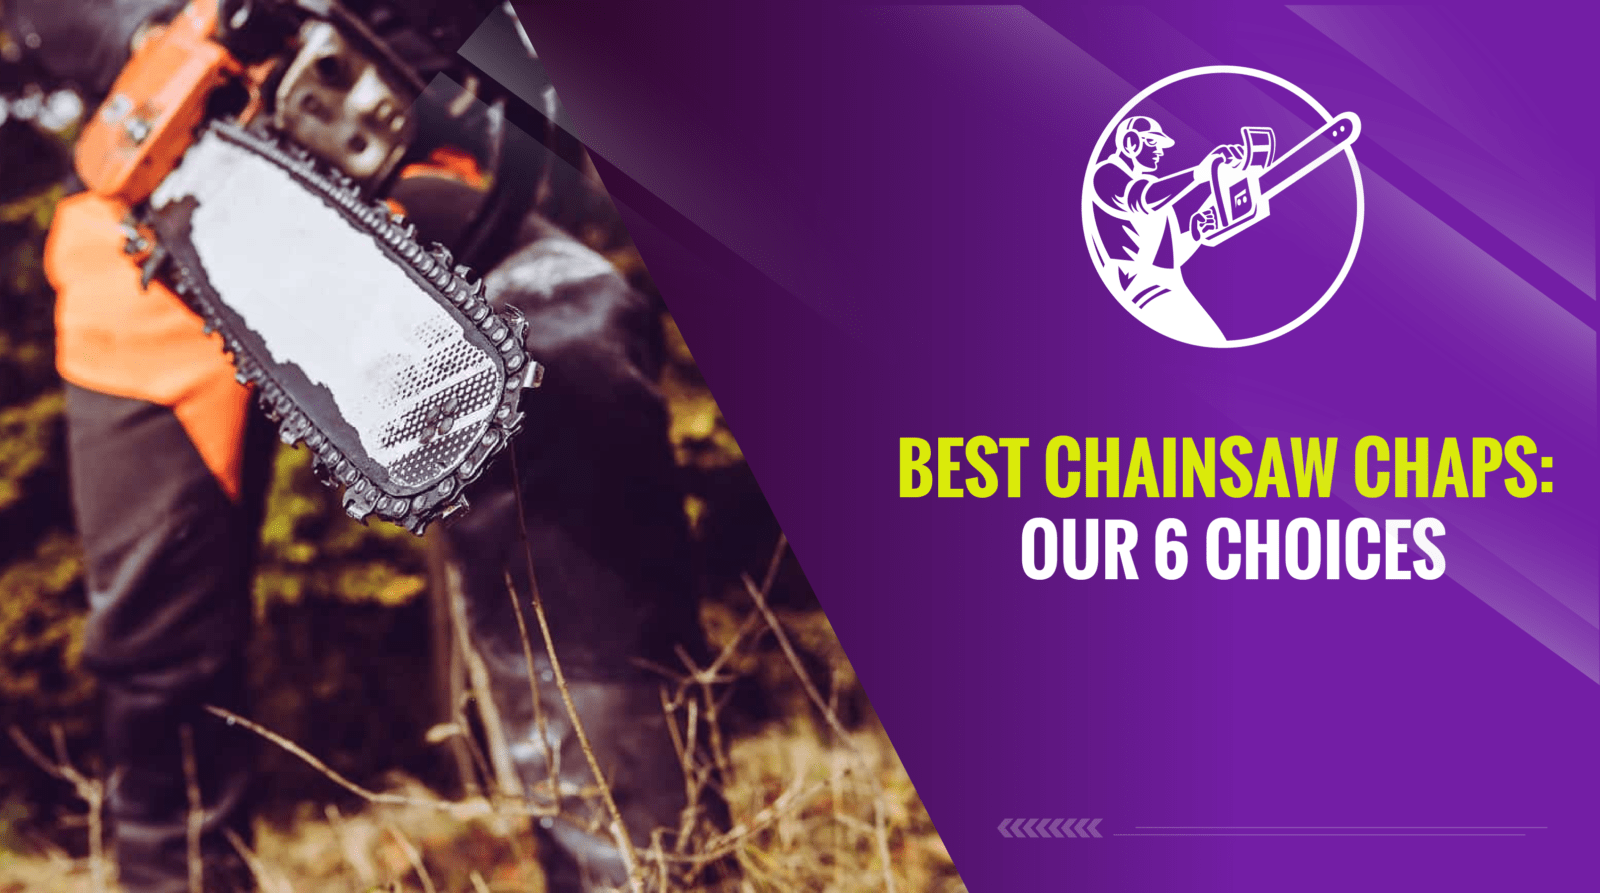 Best Chainsaw Chaps: Our 6 Choices